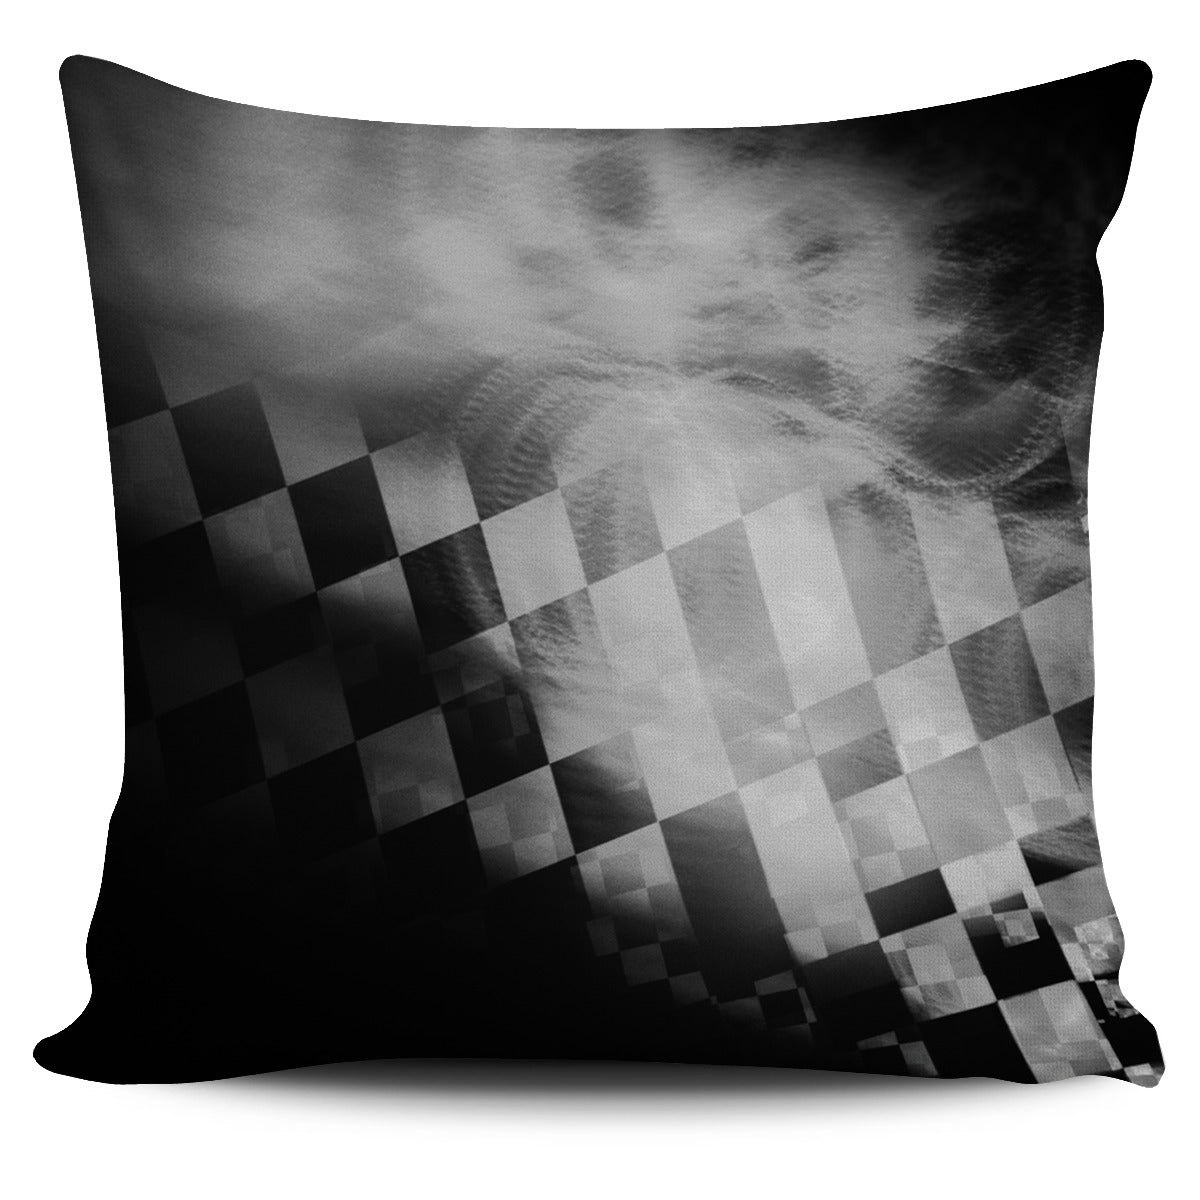 Racing Pillow Cover V16